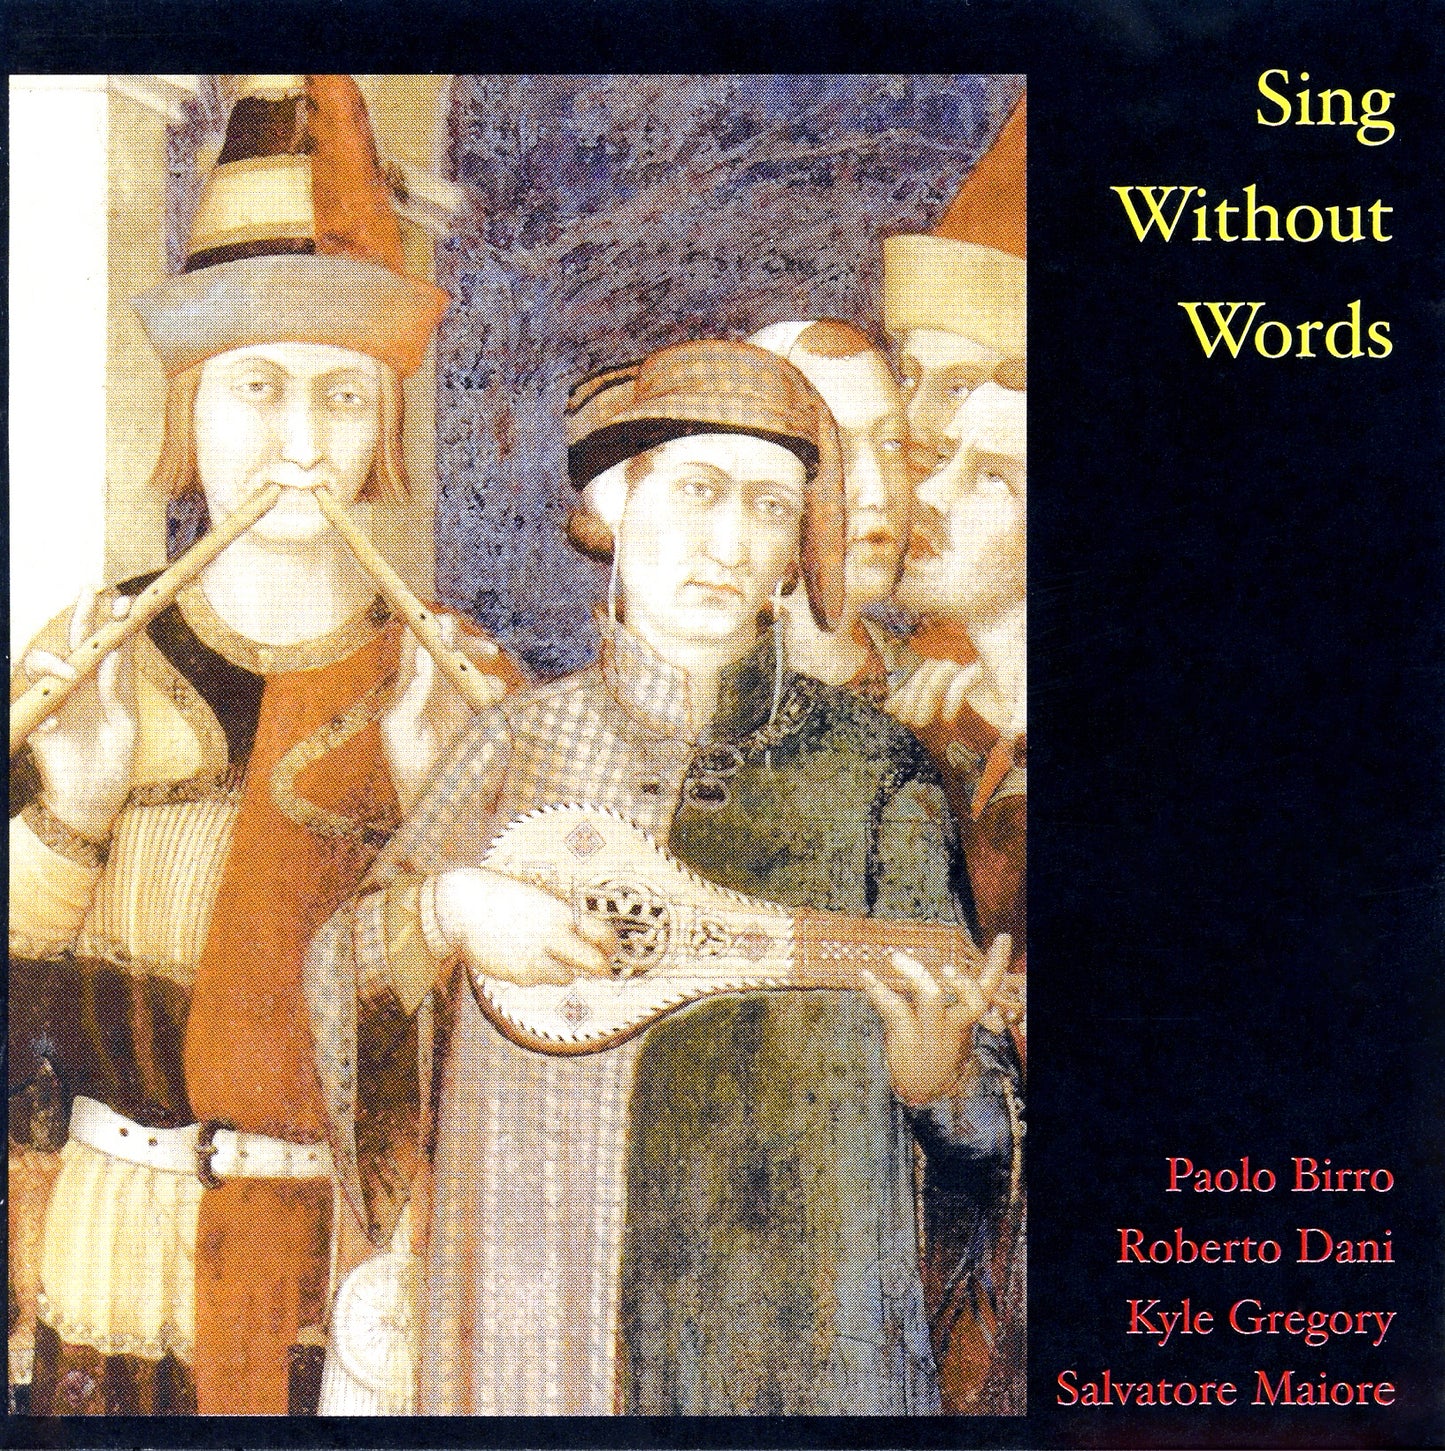 Sing Without Words - Paolo Birro, Roberto Dani, Kyle Gregory, Salvatore Maiore